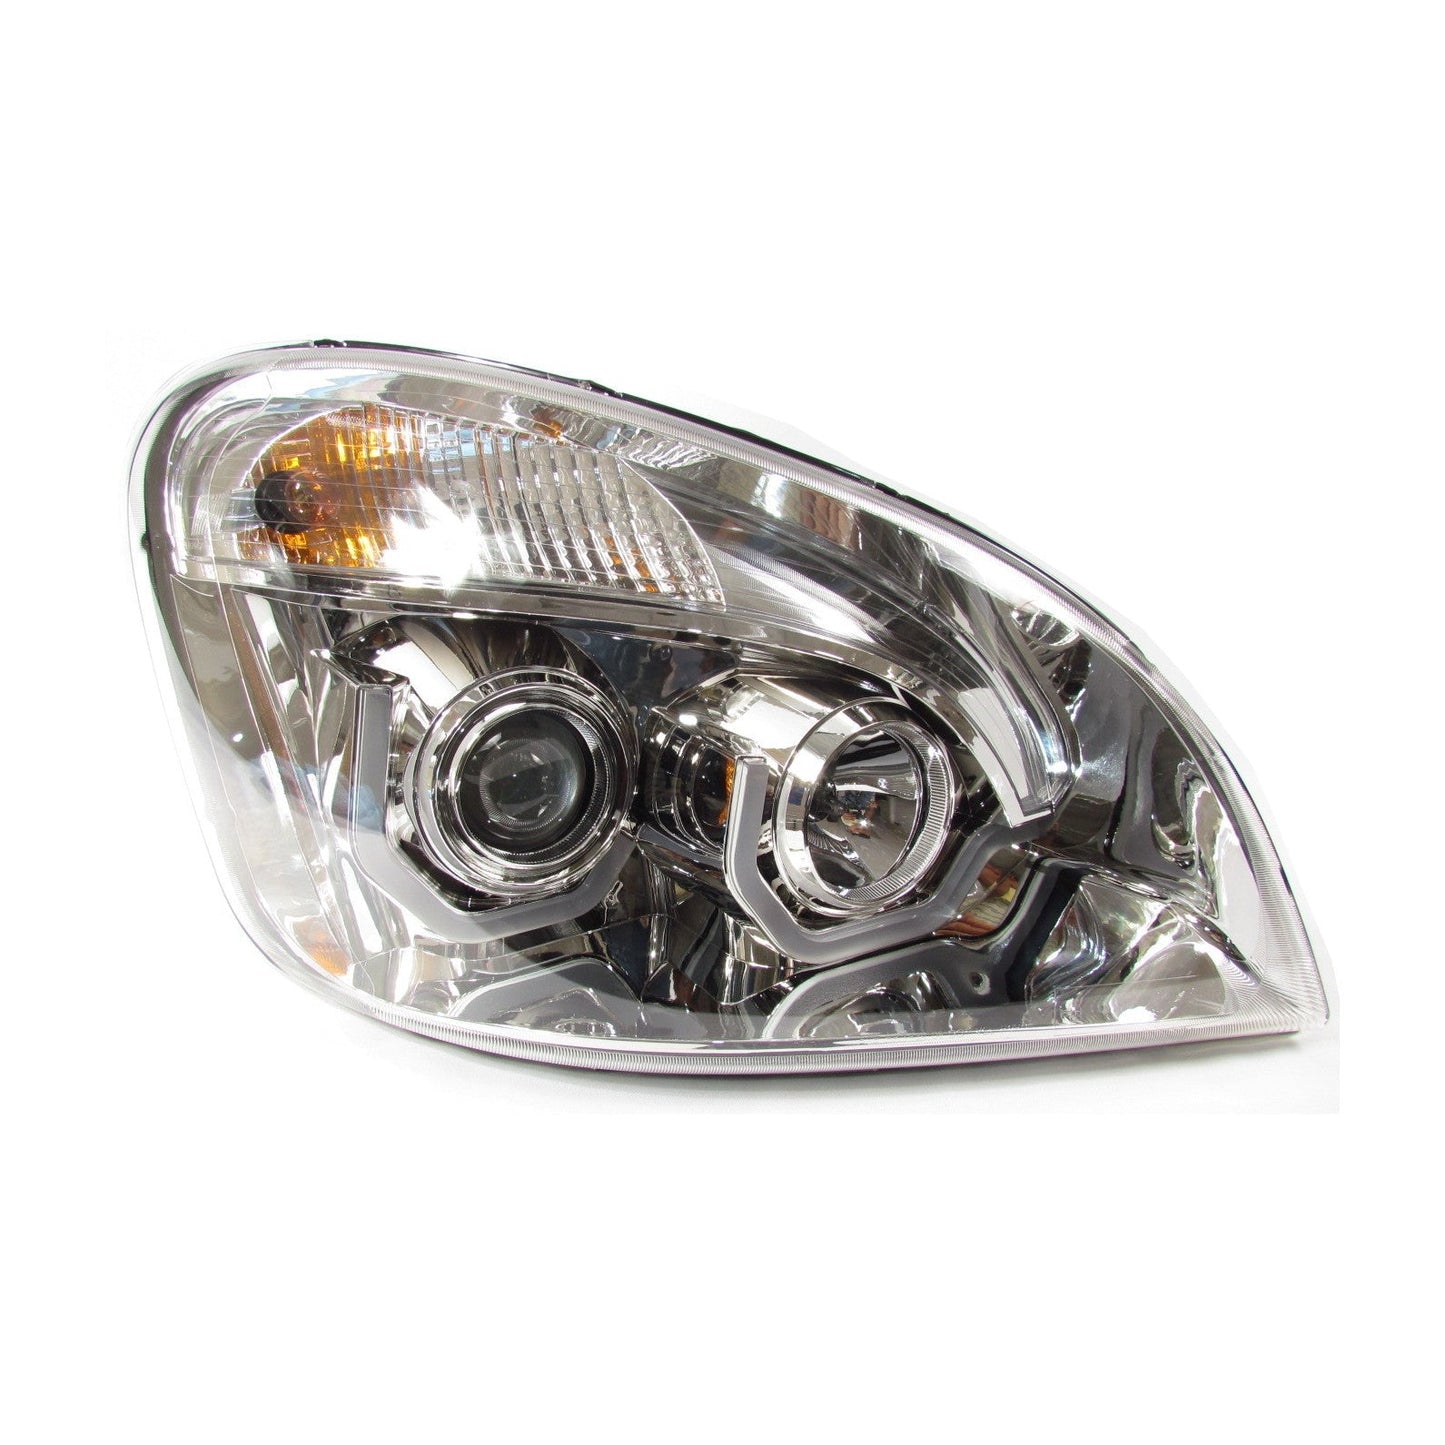 Chrome Housing Projector Headlight For Freightliner Cascadia - Driver Side